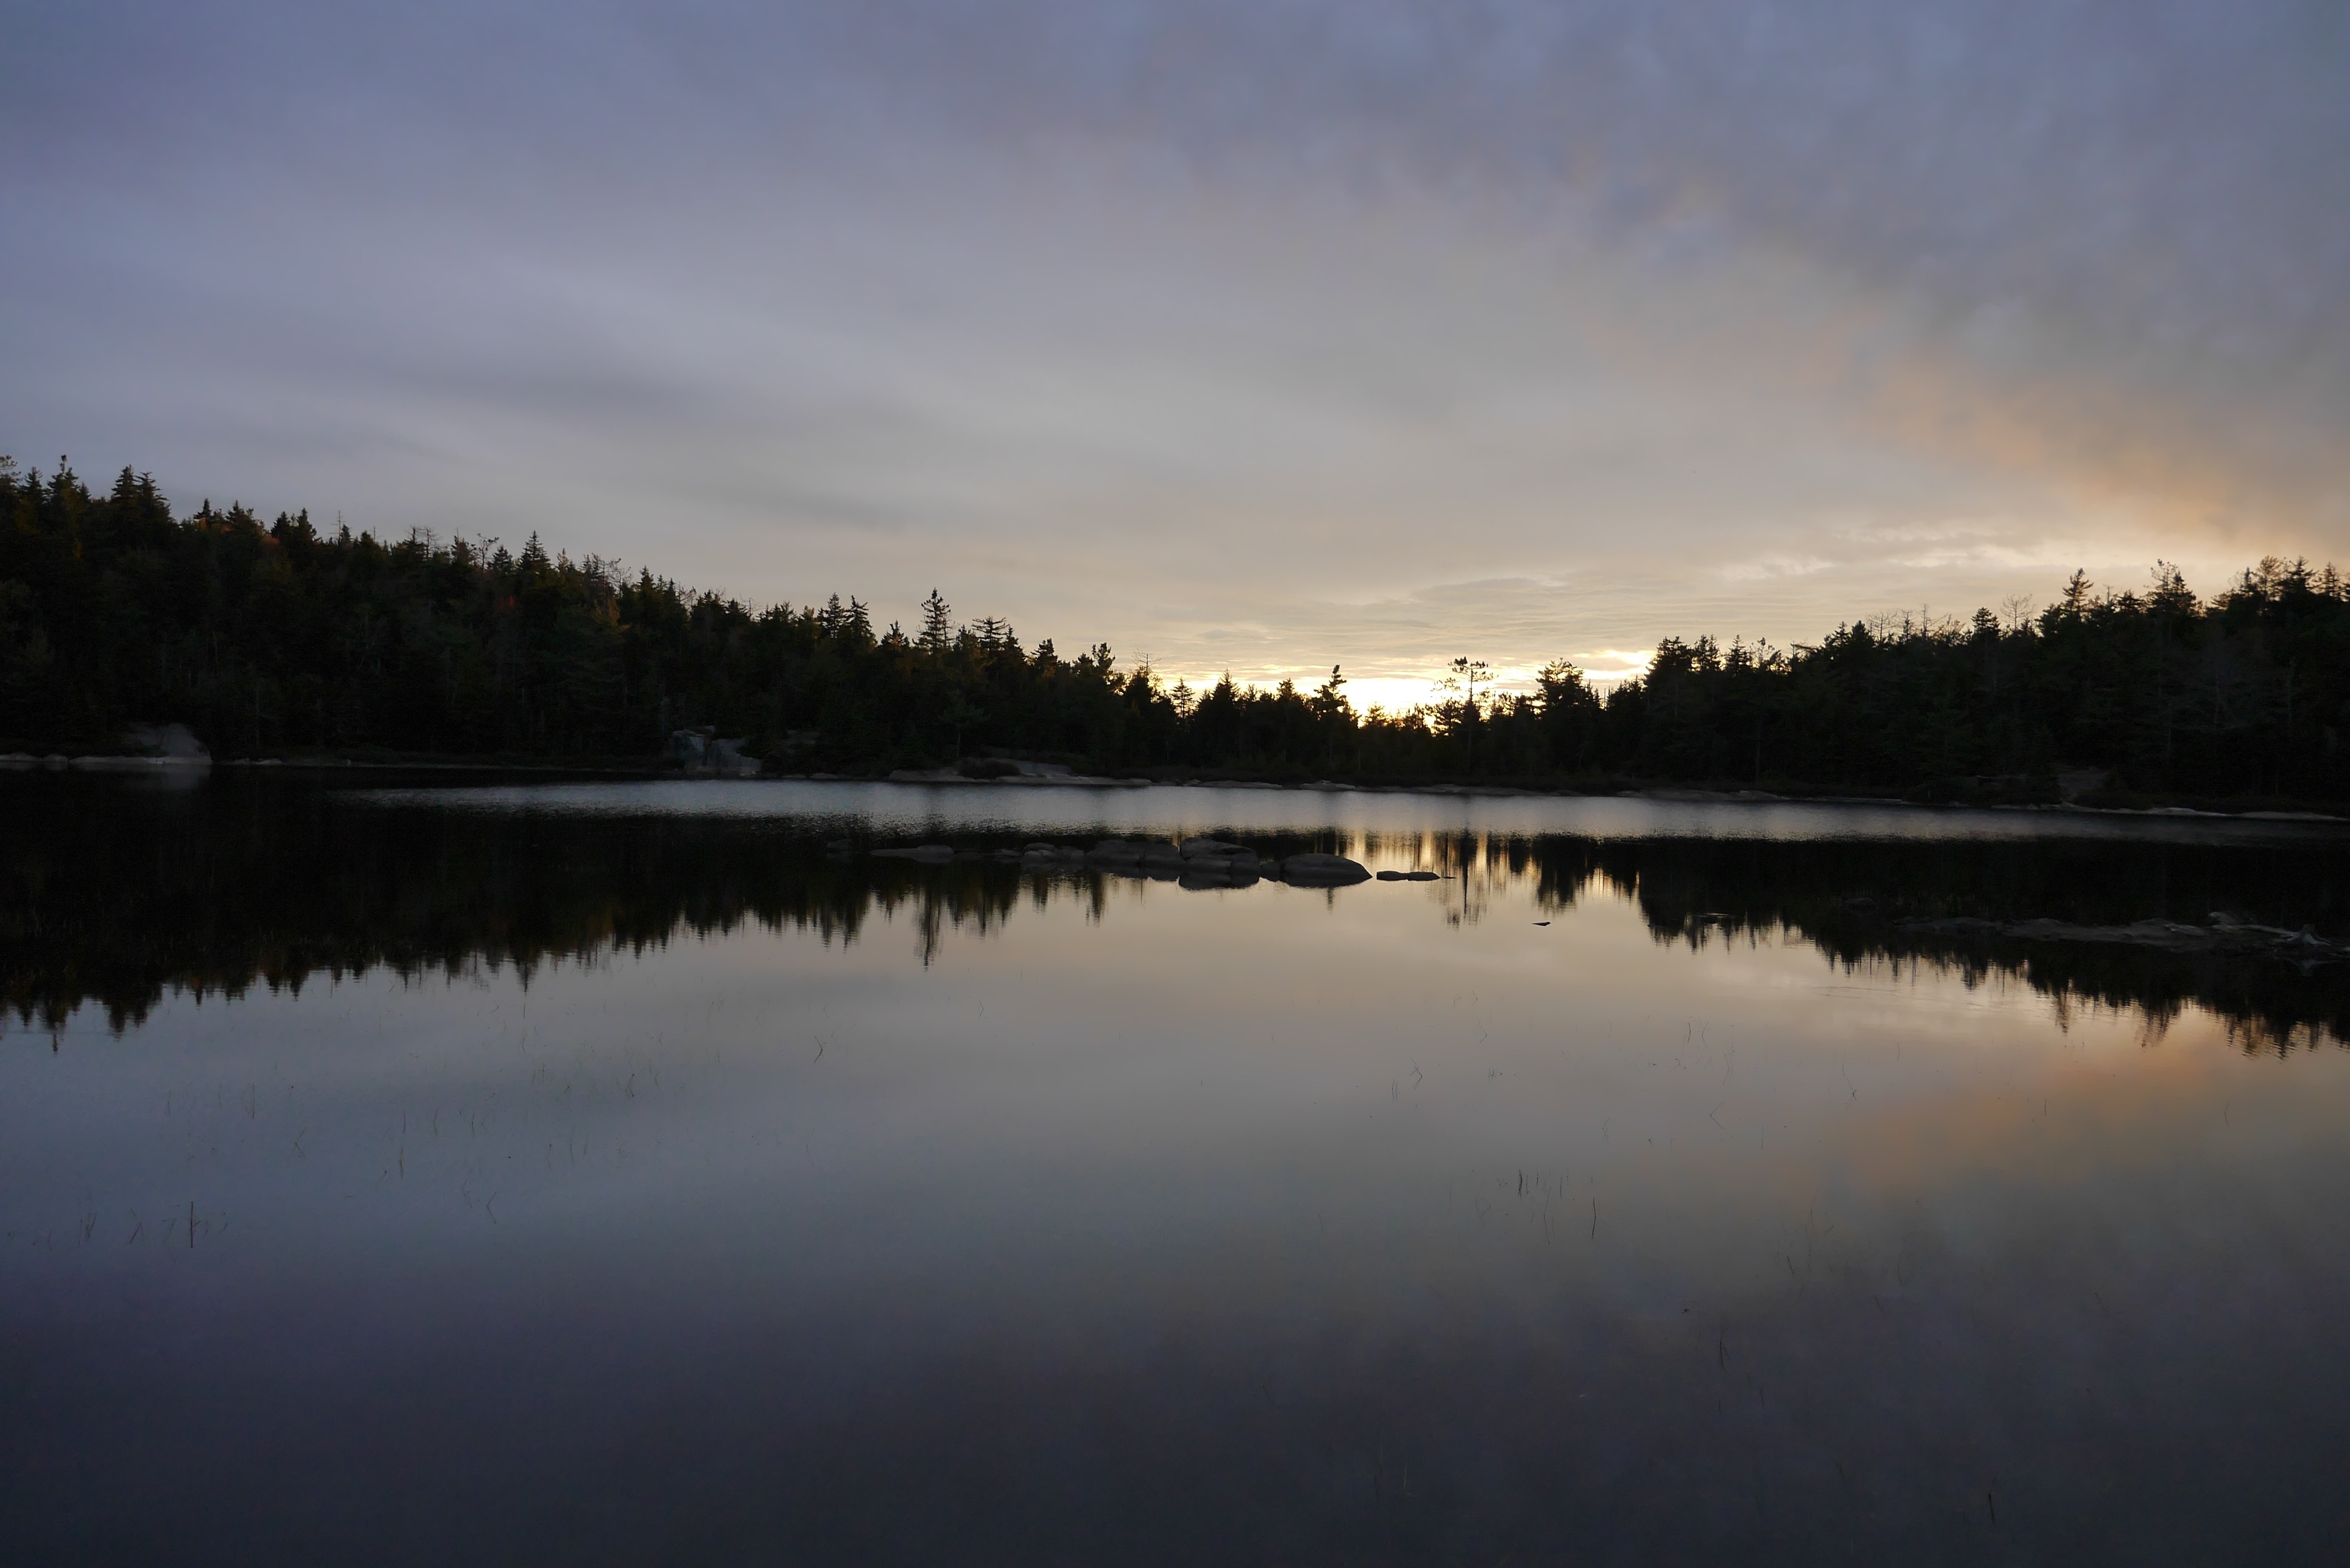 The view of the sunset at Crane pond was ideal. 